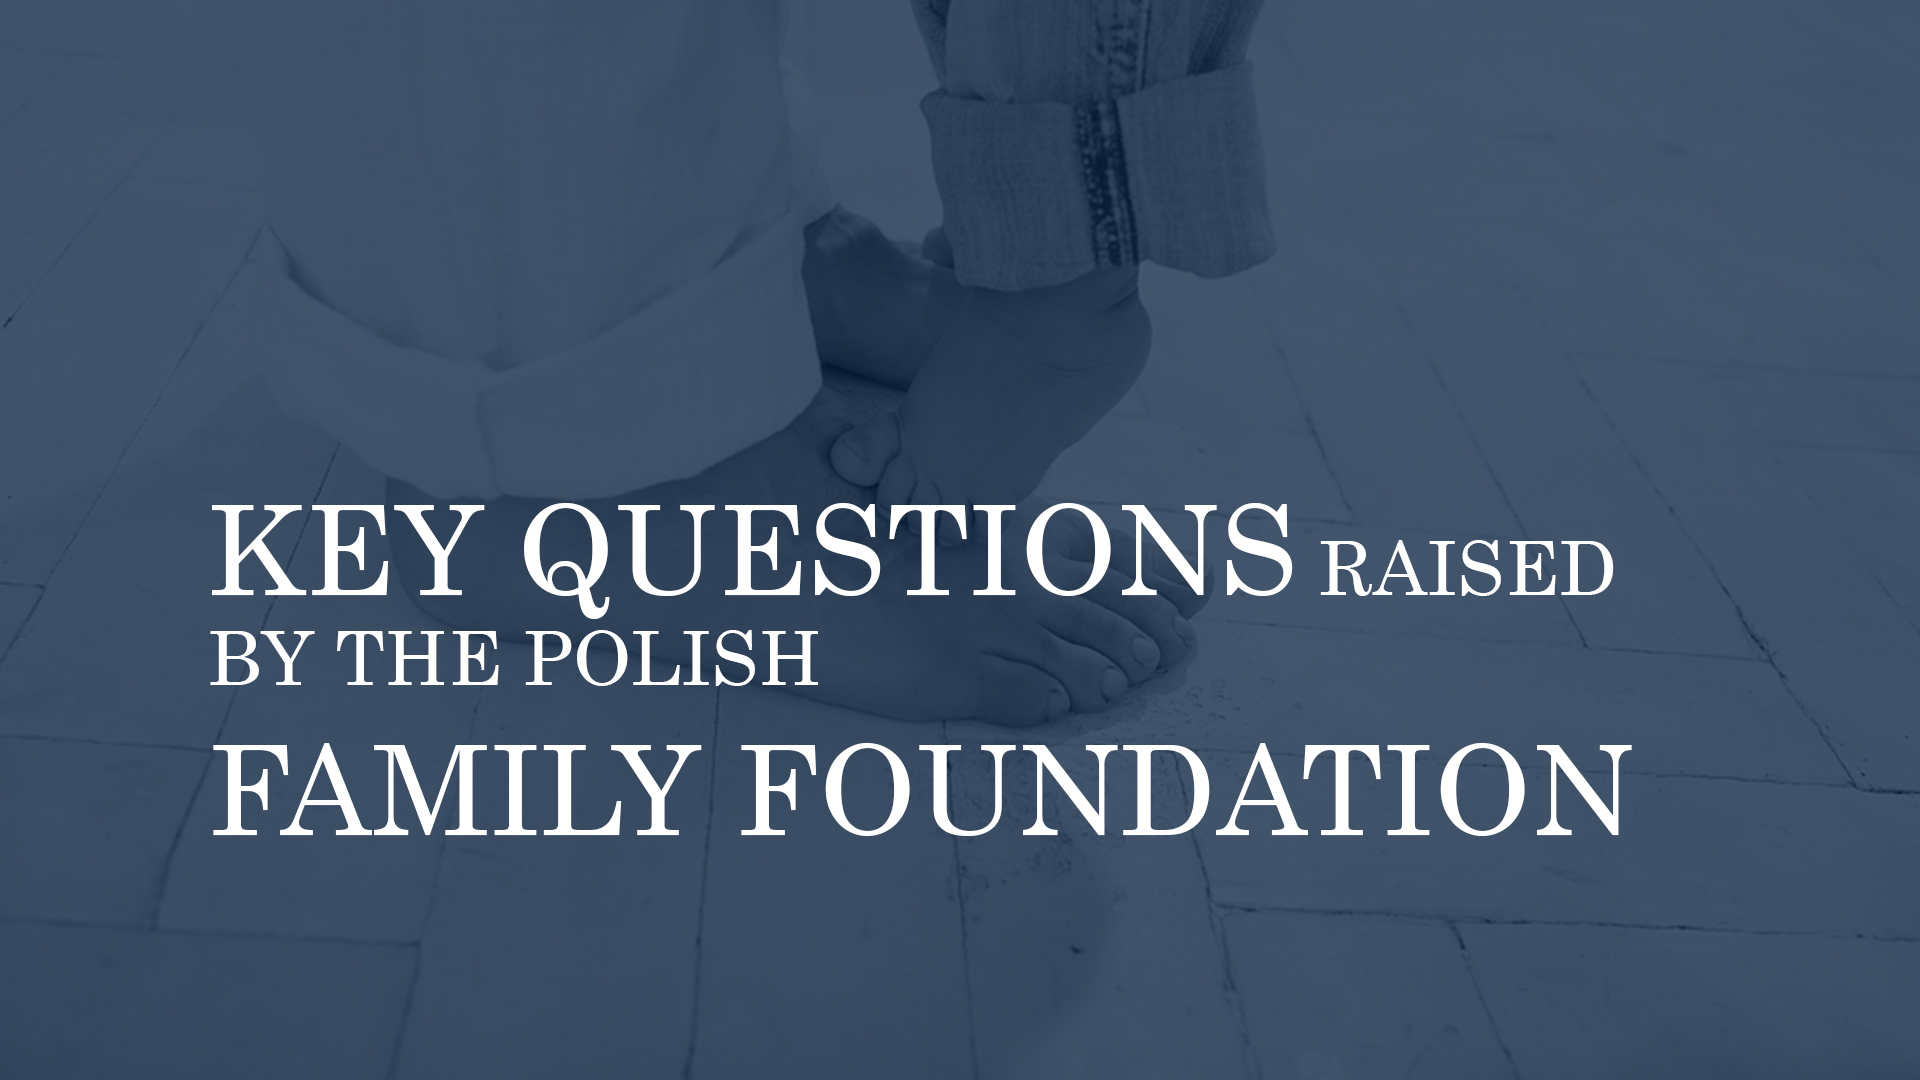 KEY QUESTIONS RAISED BY THE POLISH FAMILY FOUNDATION